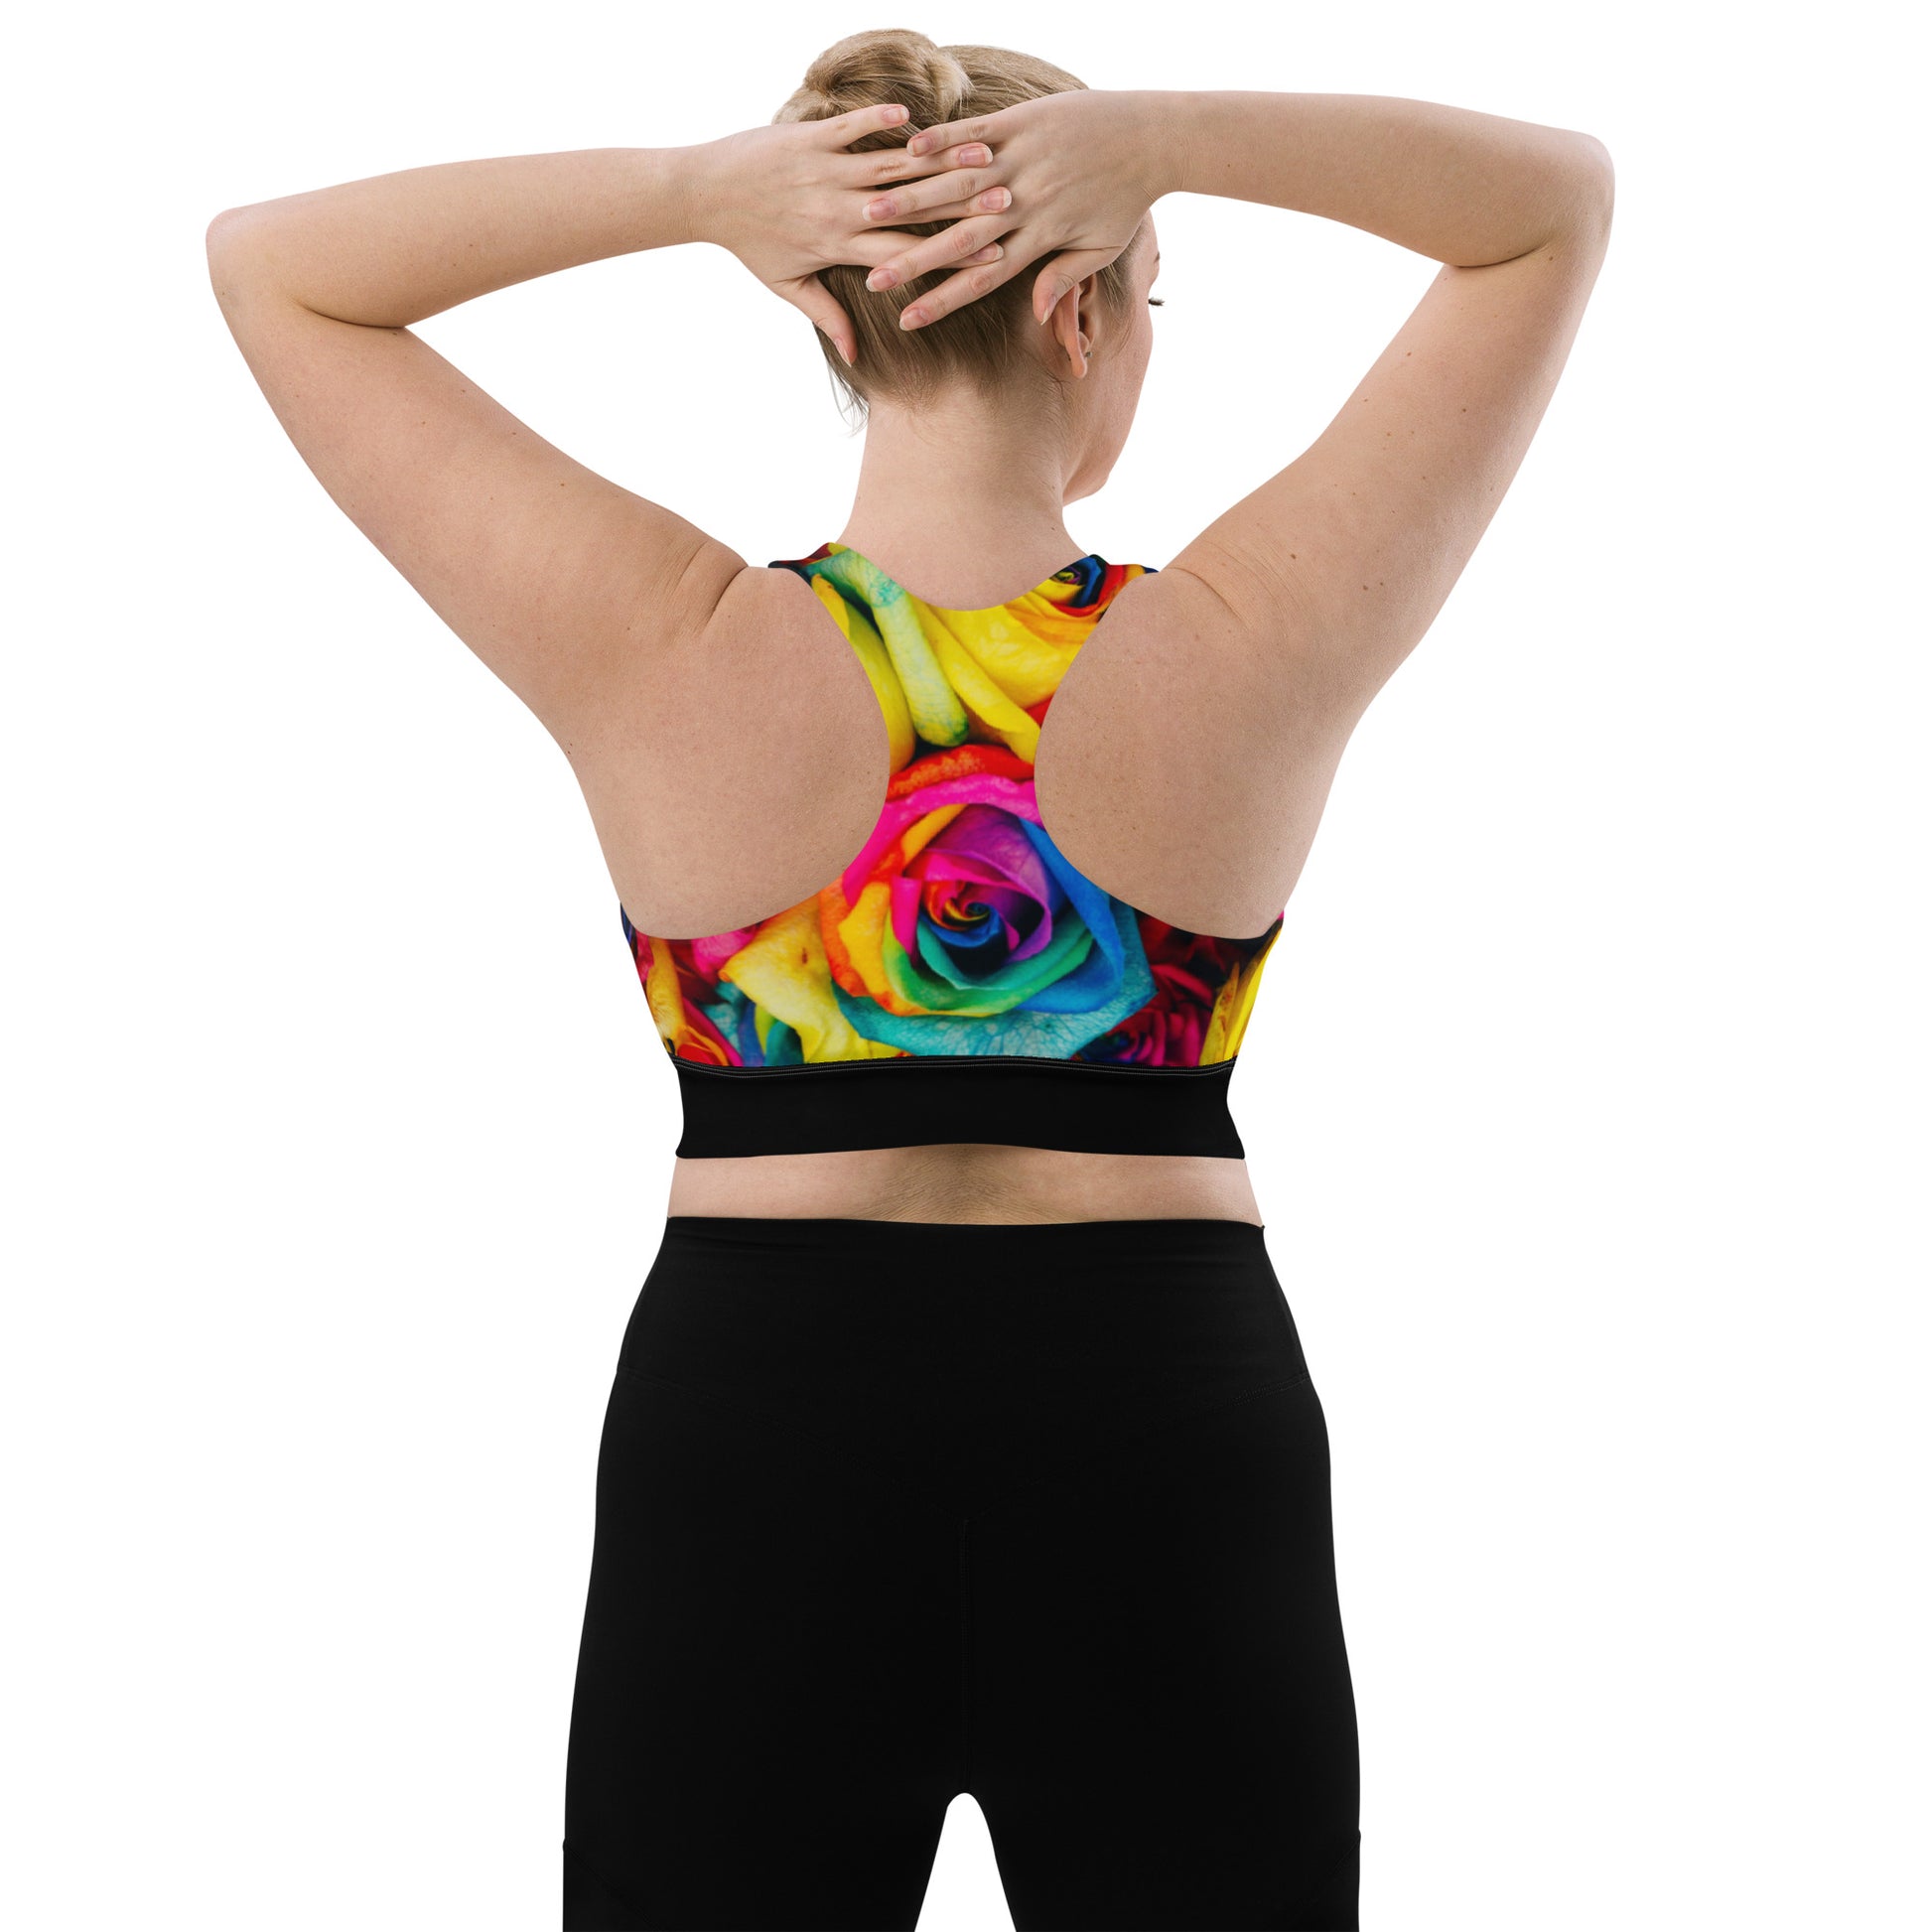 Plus Size Emote Merch from SpotlYght Seeker - from the Bravo and Roses Collection the Moonlight & Roses Sports Bra for the Female Artist because artists deserve praise.